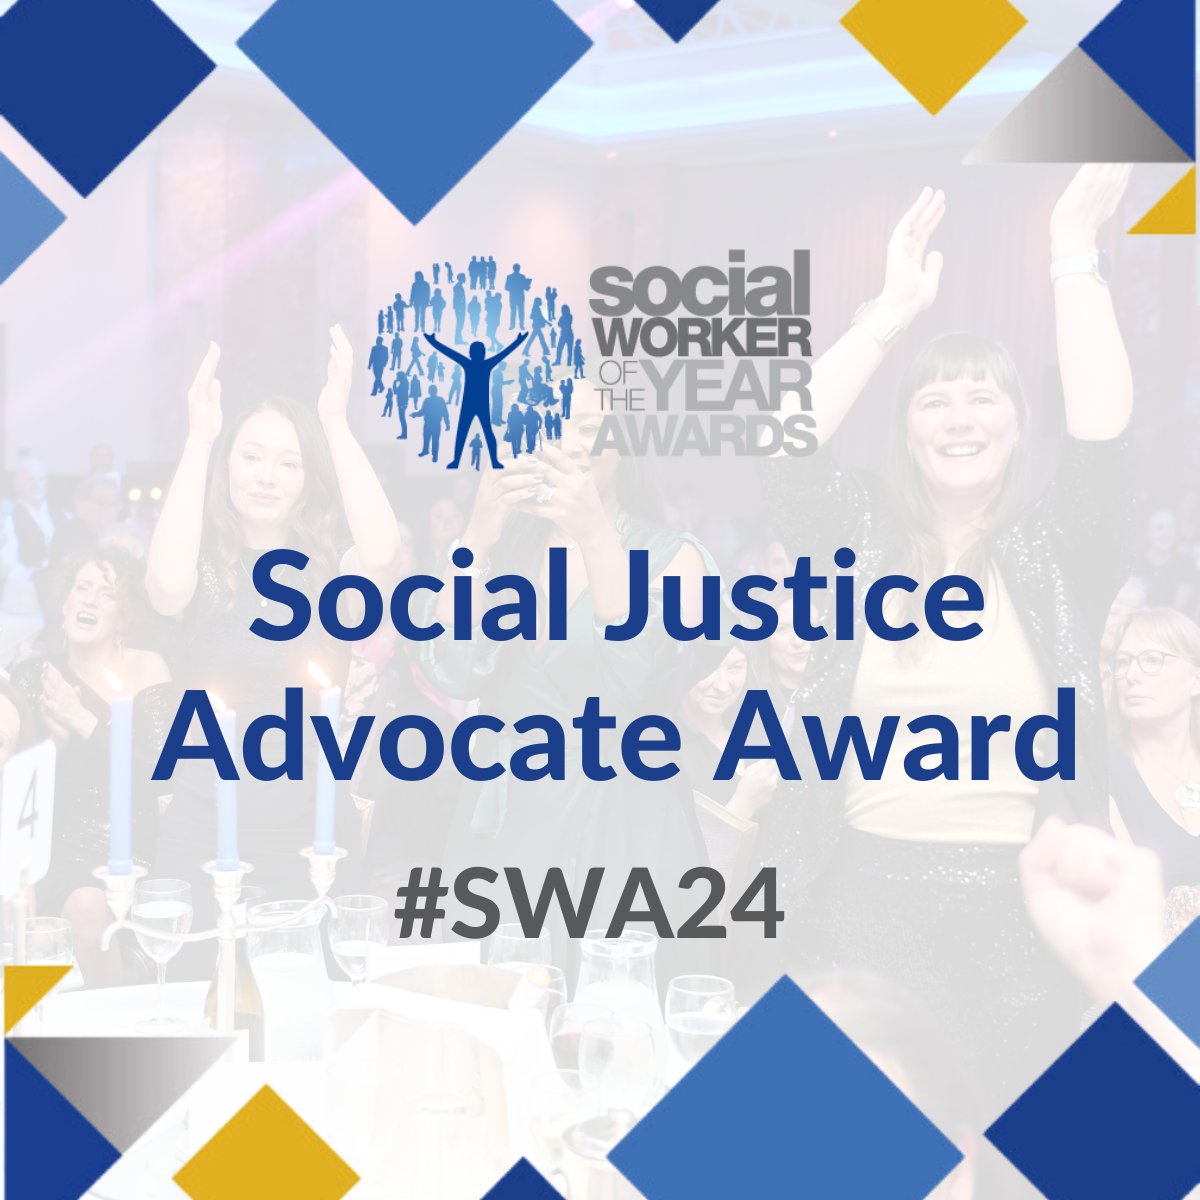 Do you know a social worker who challenges injustice and discriminatory systems? Nominate them for the Social Justice Advocate Award and recognise their outstanding work: socialworkawards.com